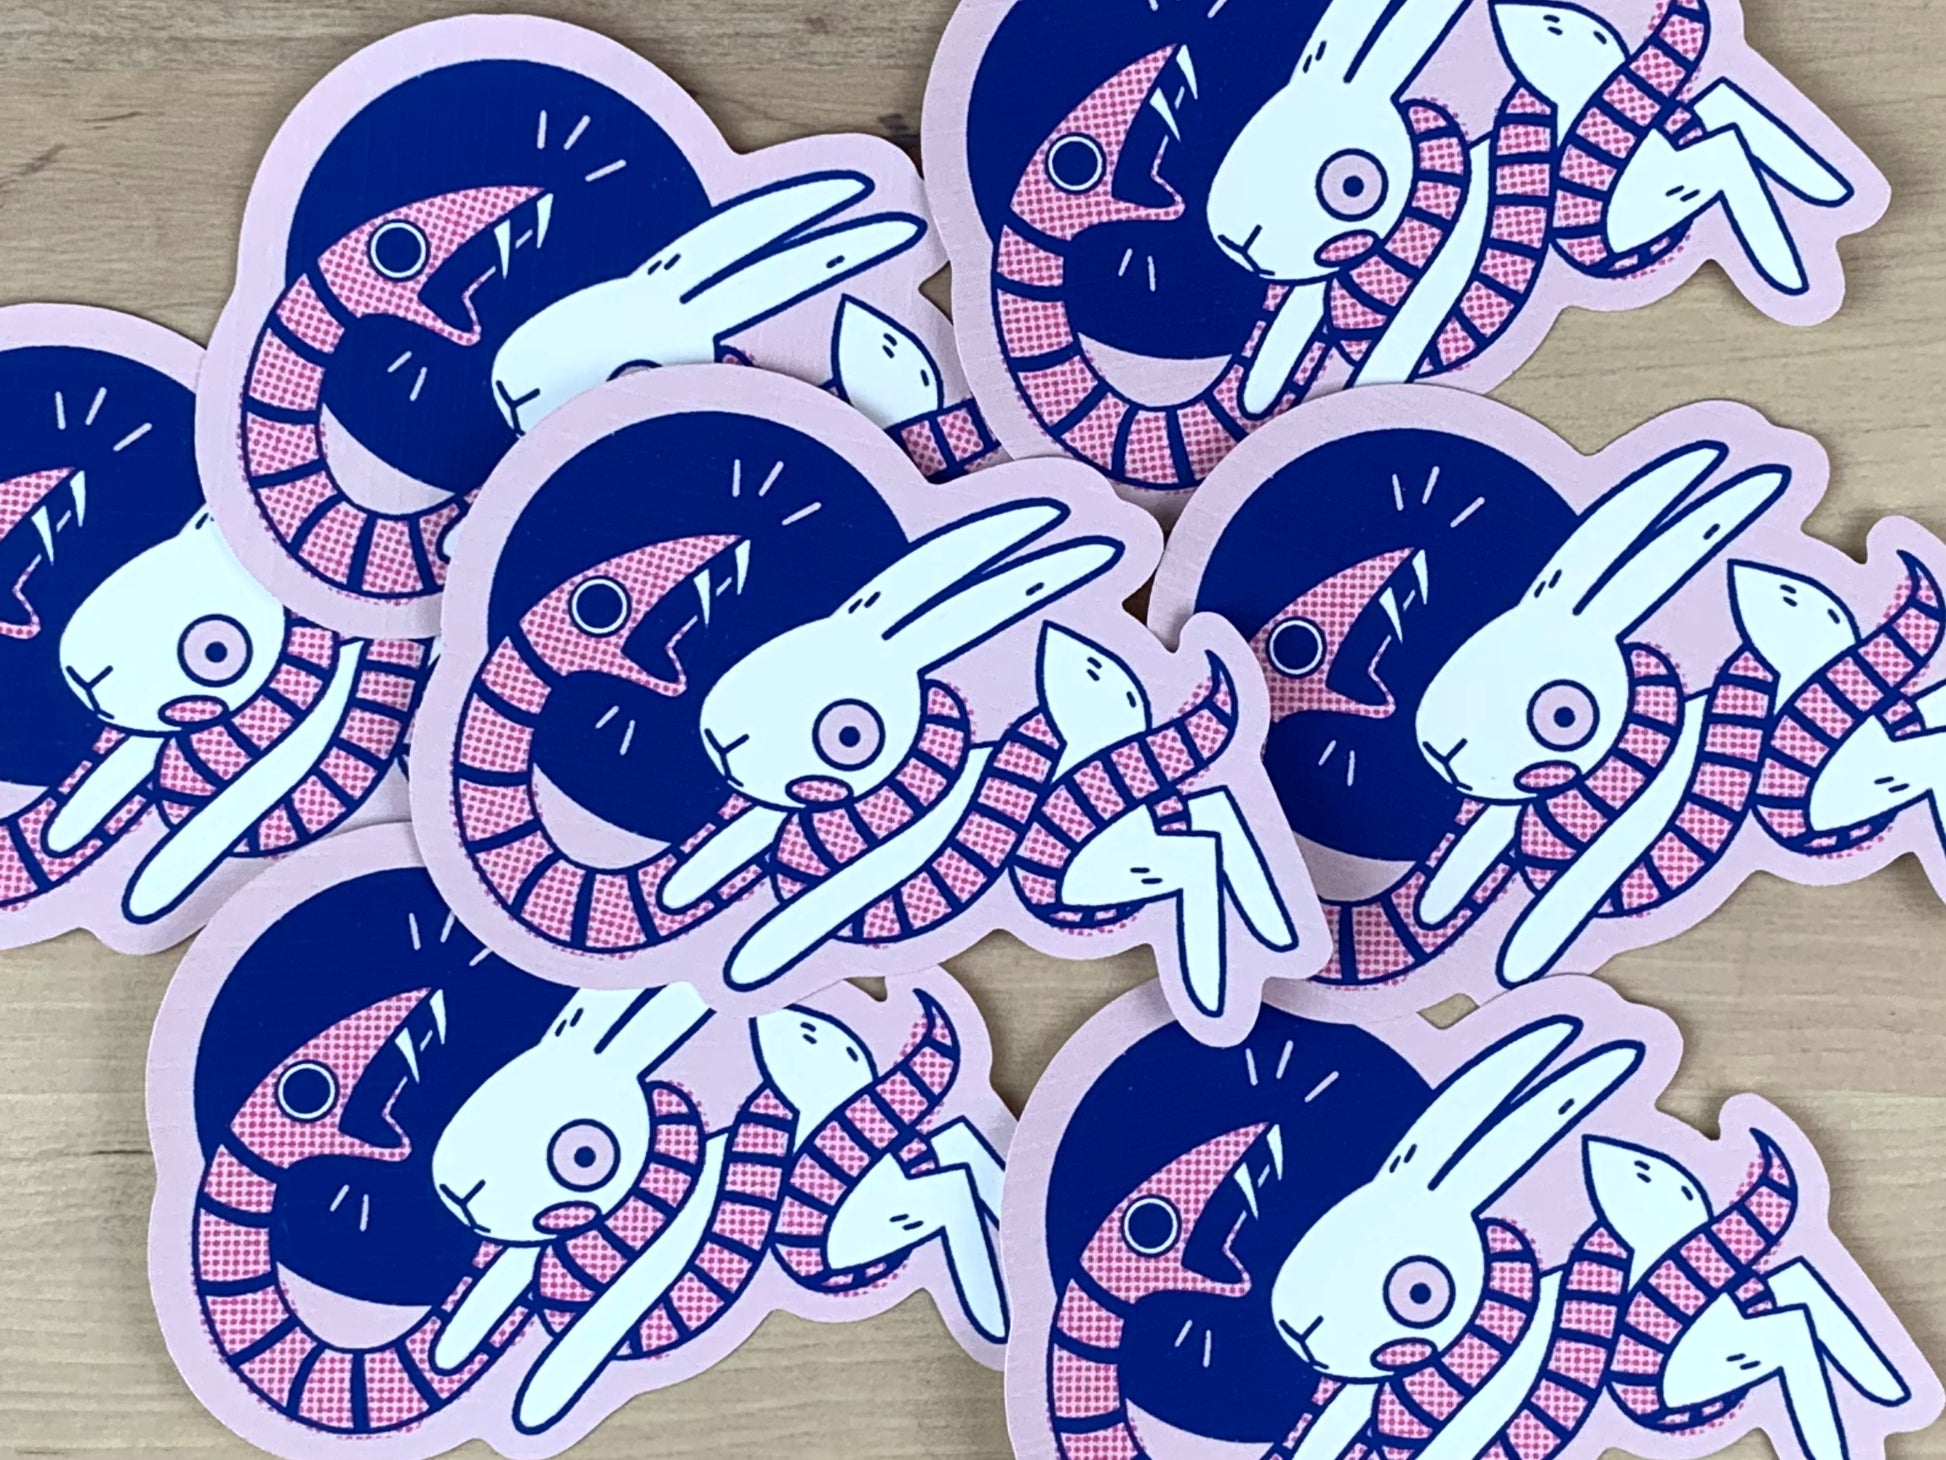 Stickers in pink and blue of a snake wrapping itself around a scared hare/rabbit.